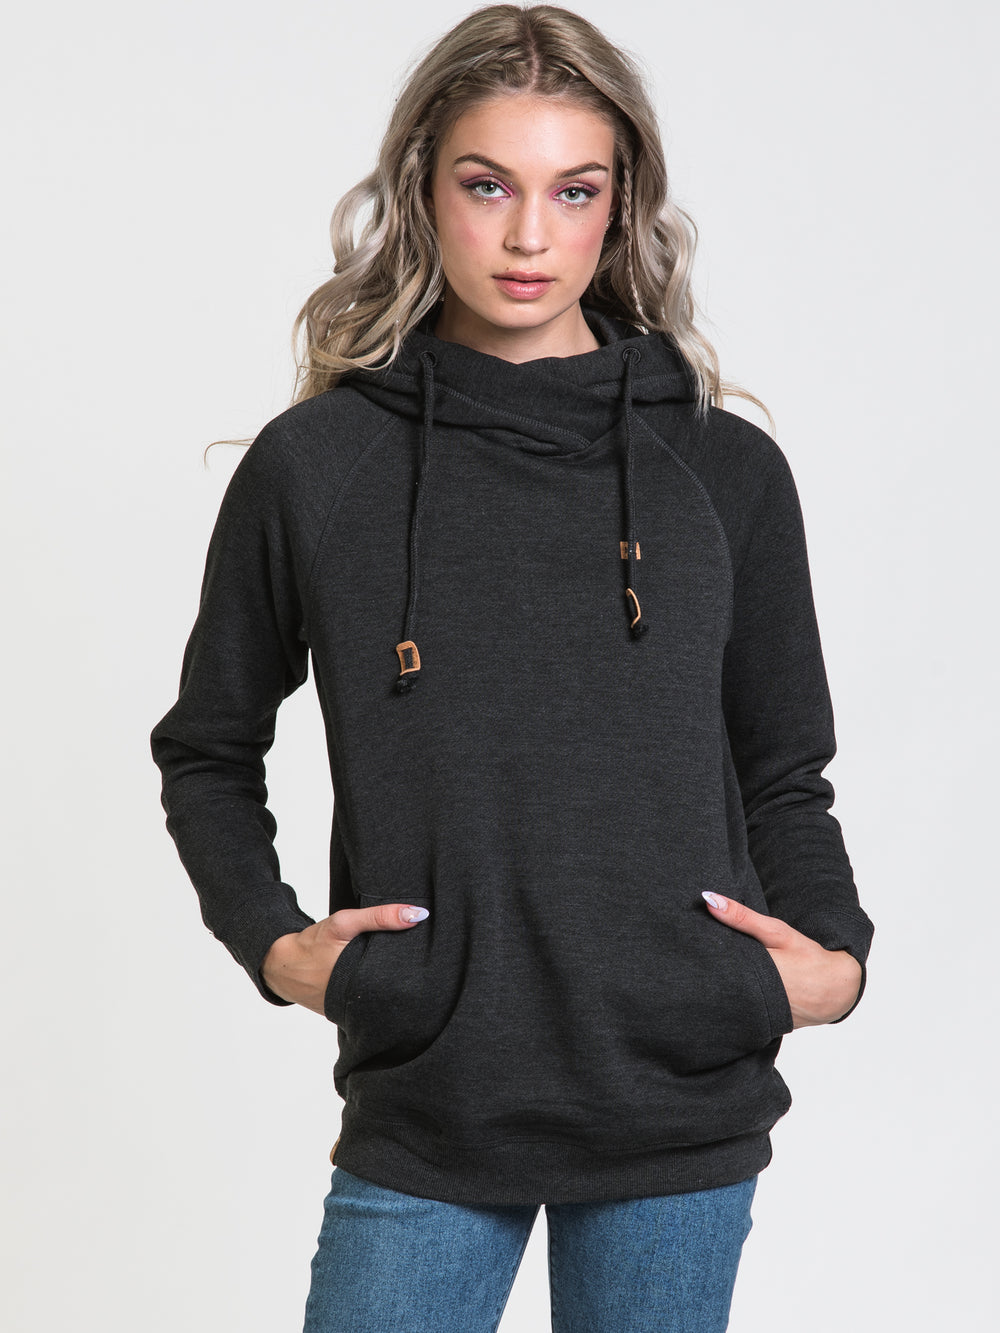 TENTREE BURNEY CORK SLEEVE EMBROIDERED PULLOVER HOODIE - CLEARANCE